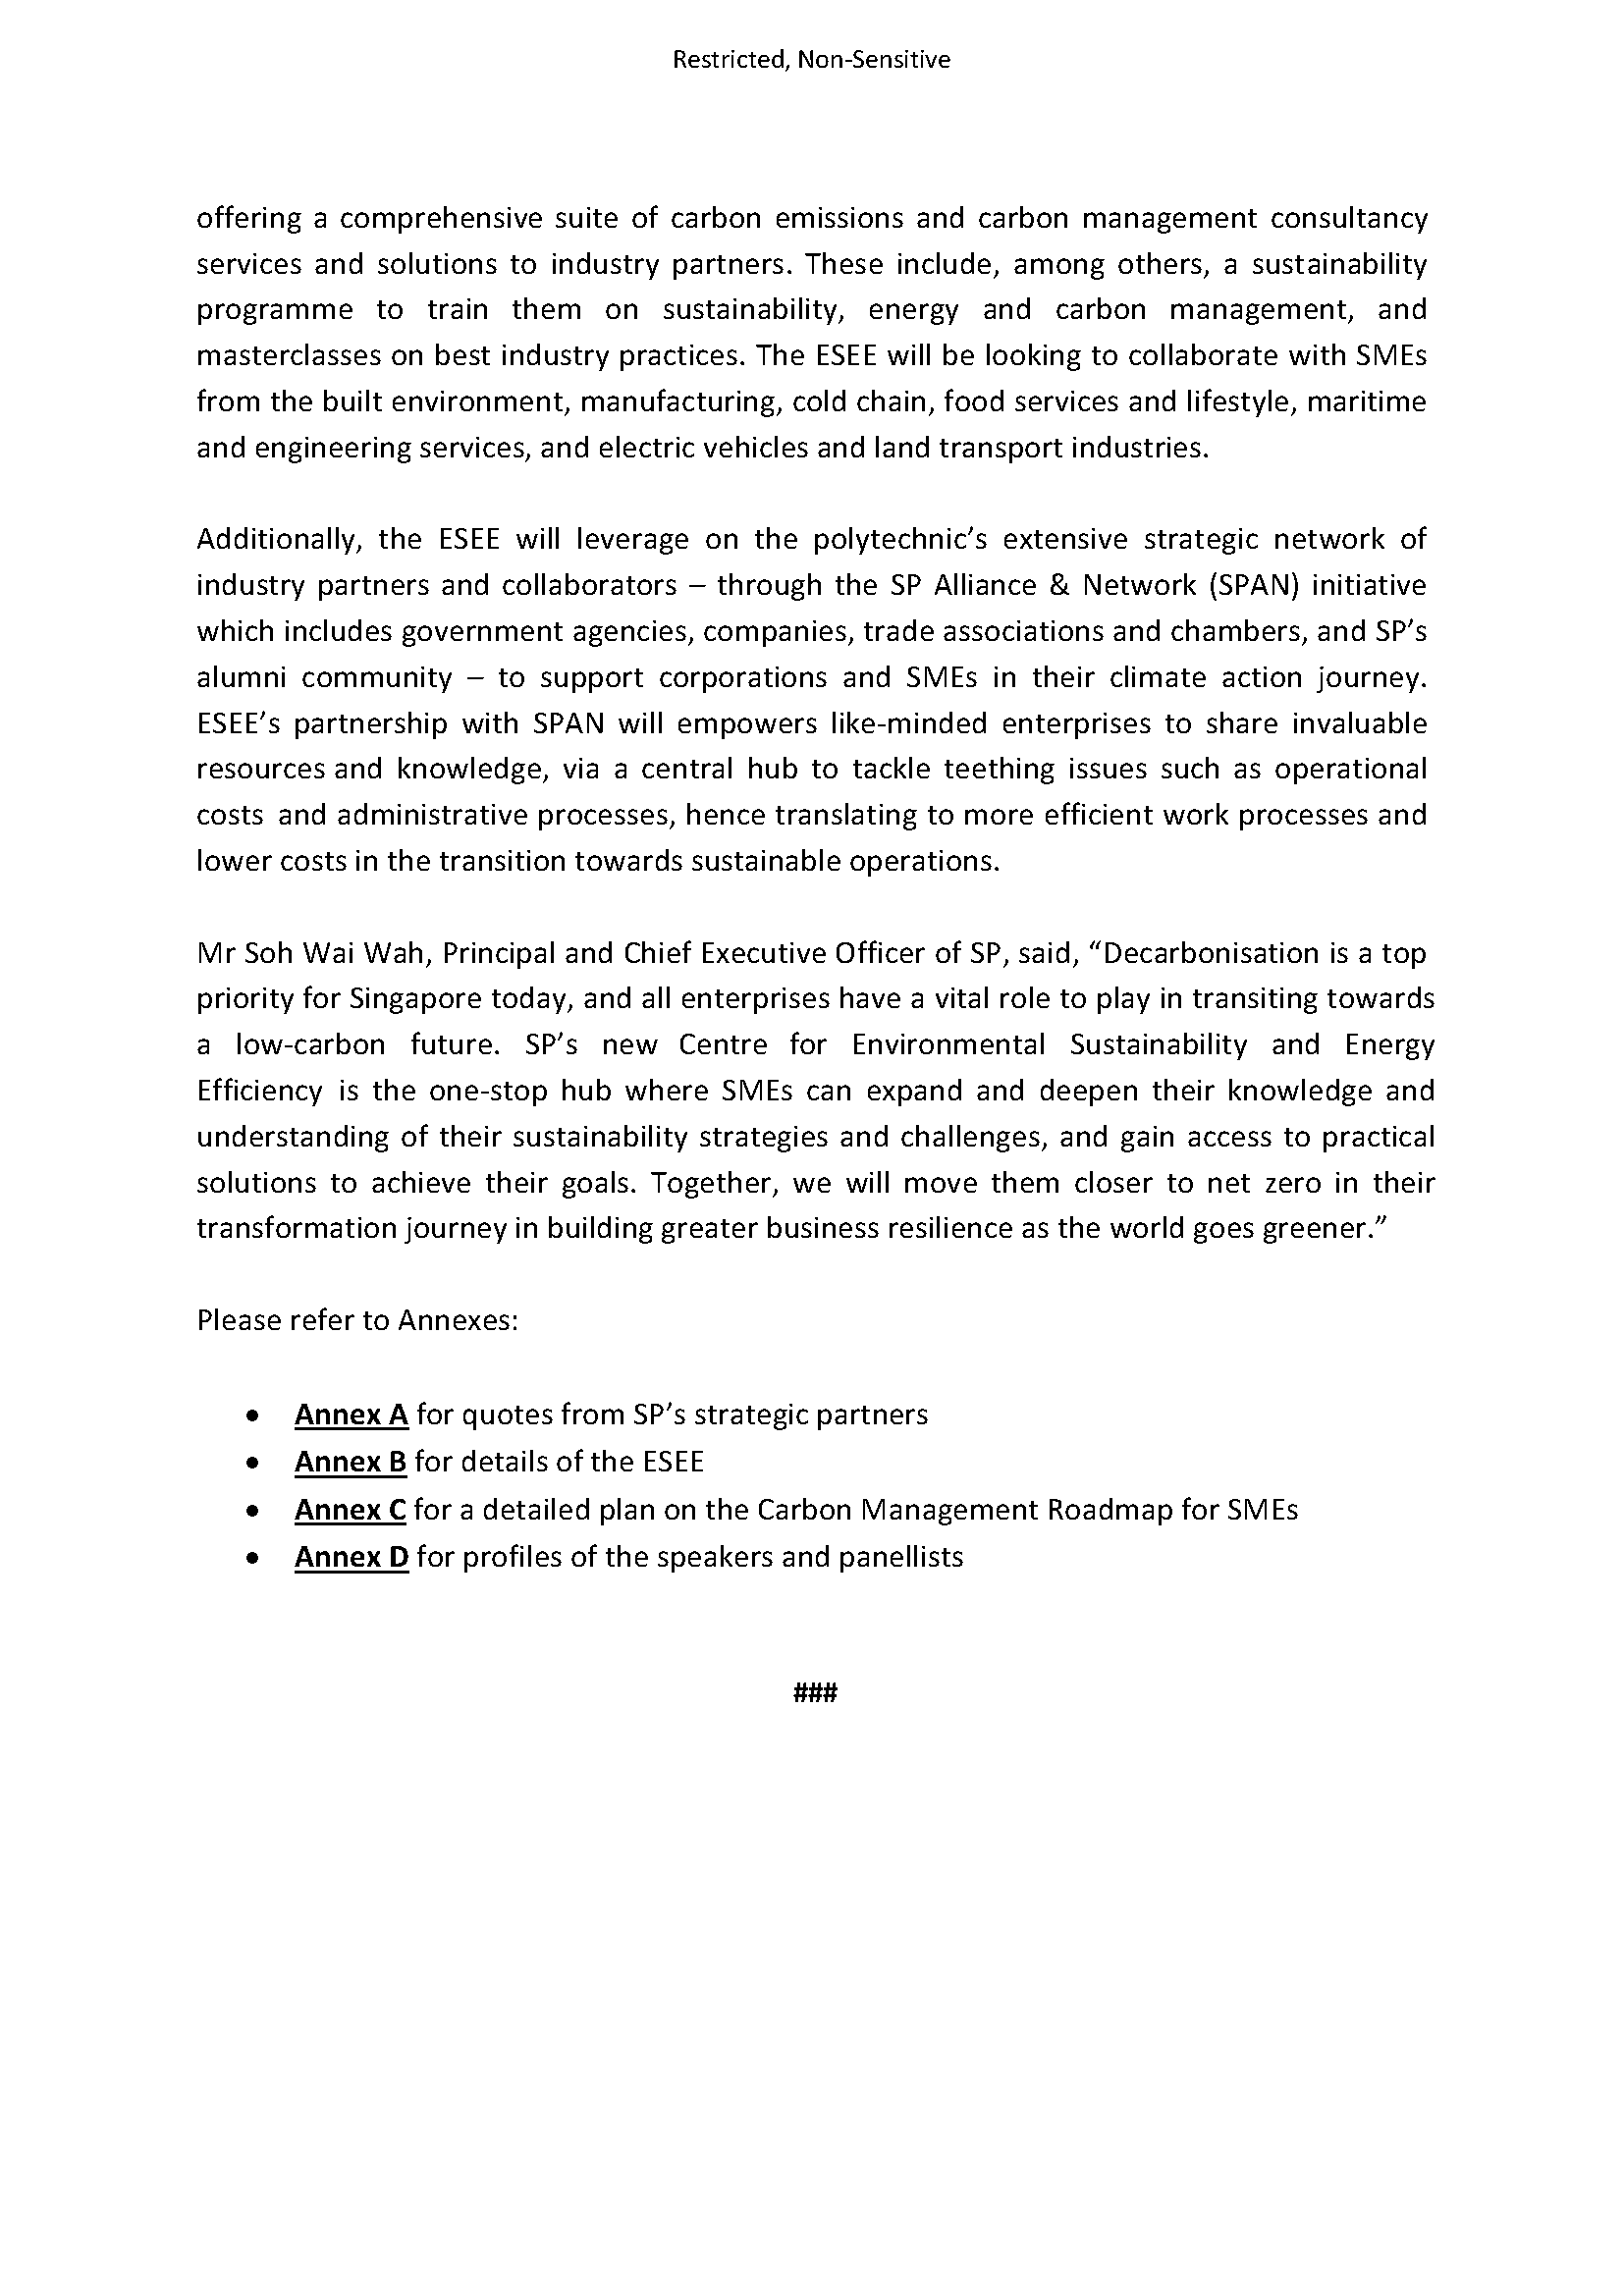 SP_sustainability_19 Aug media release_final v2_Page_02